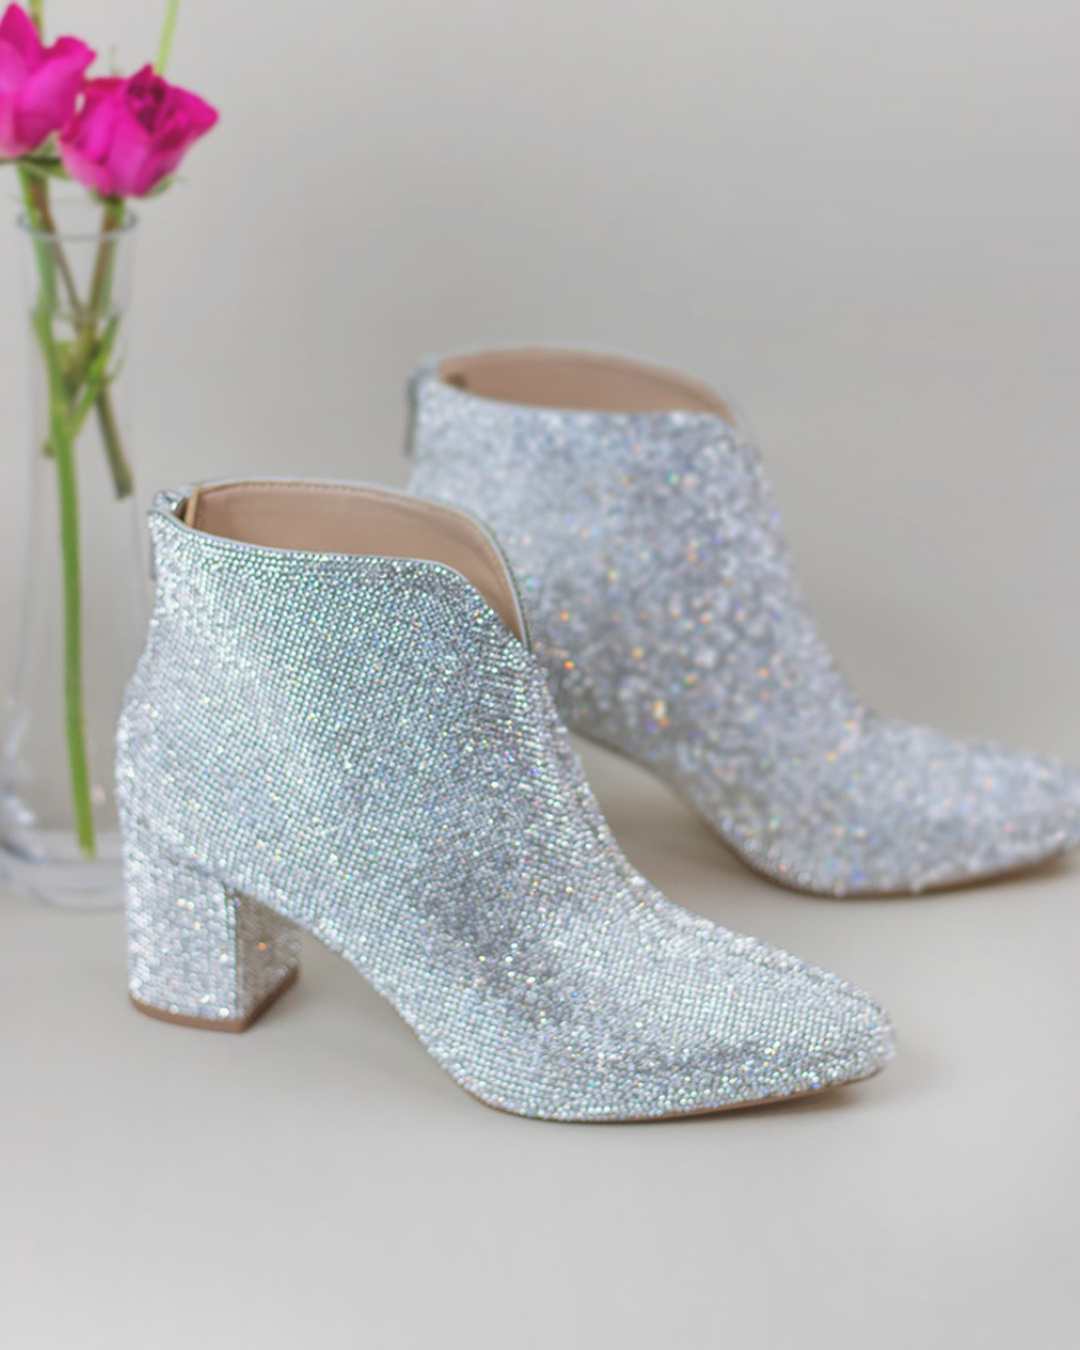 wedding shoes low heel boots sparkles silver katewhitcomb